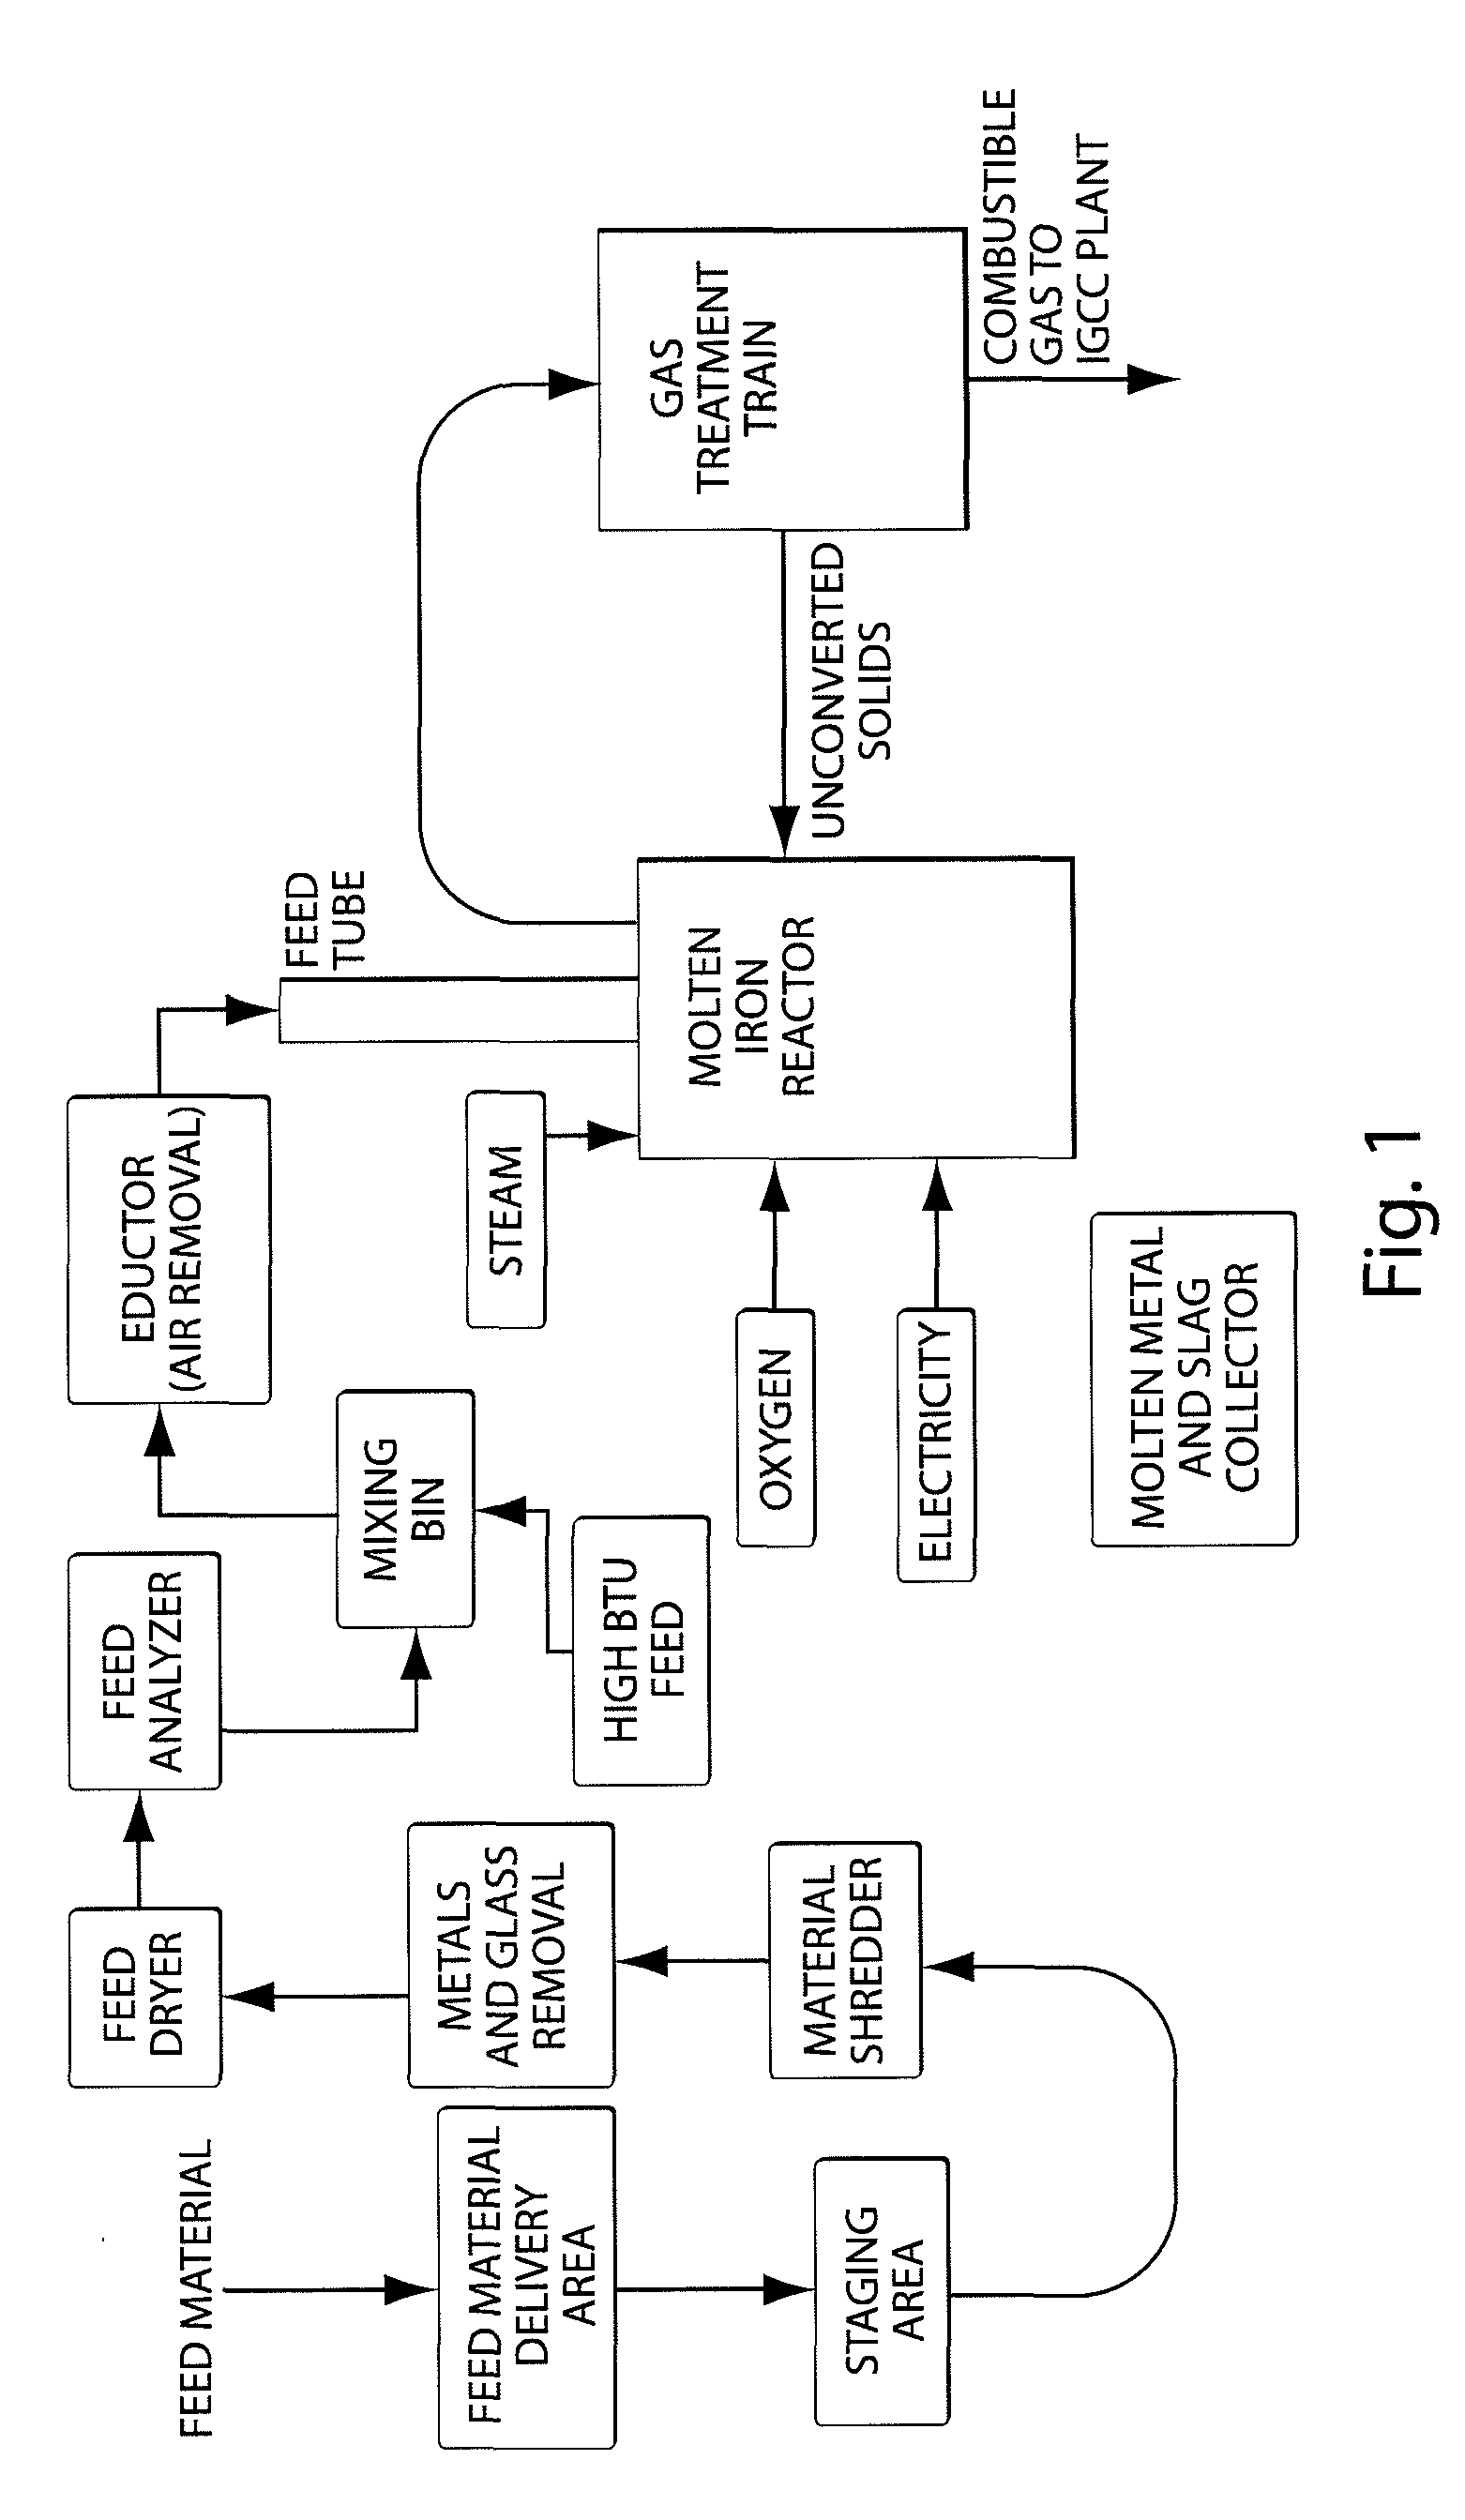 Method for controlling syngas production in a system with multiple feed materials using a molten metal bath